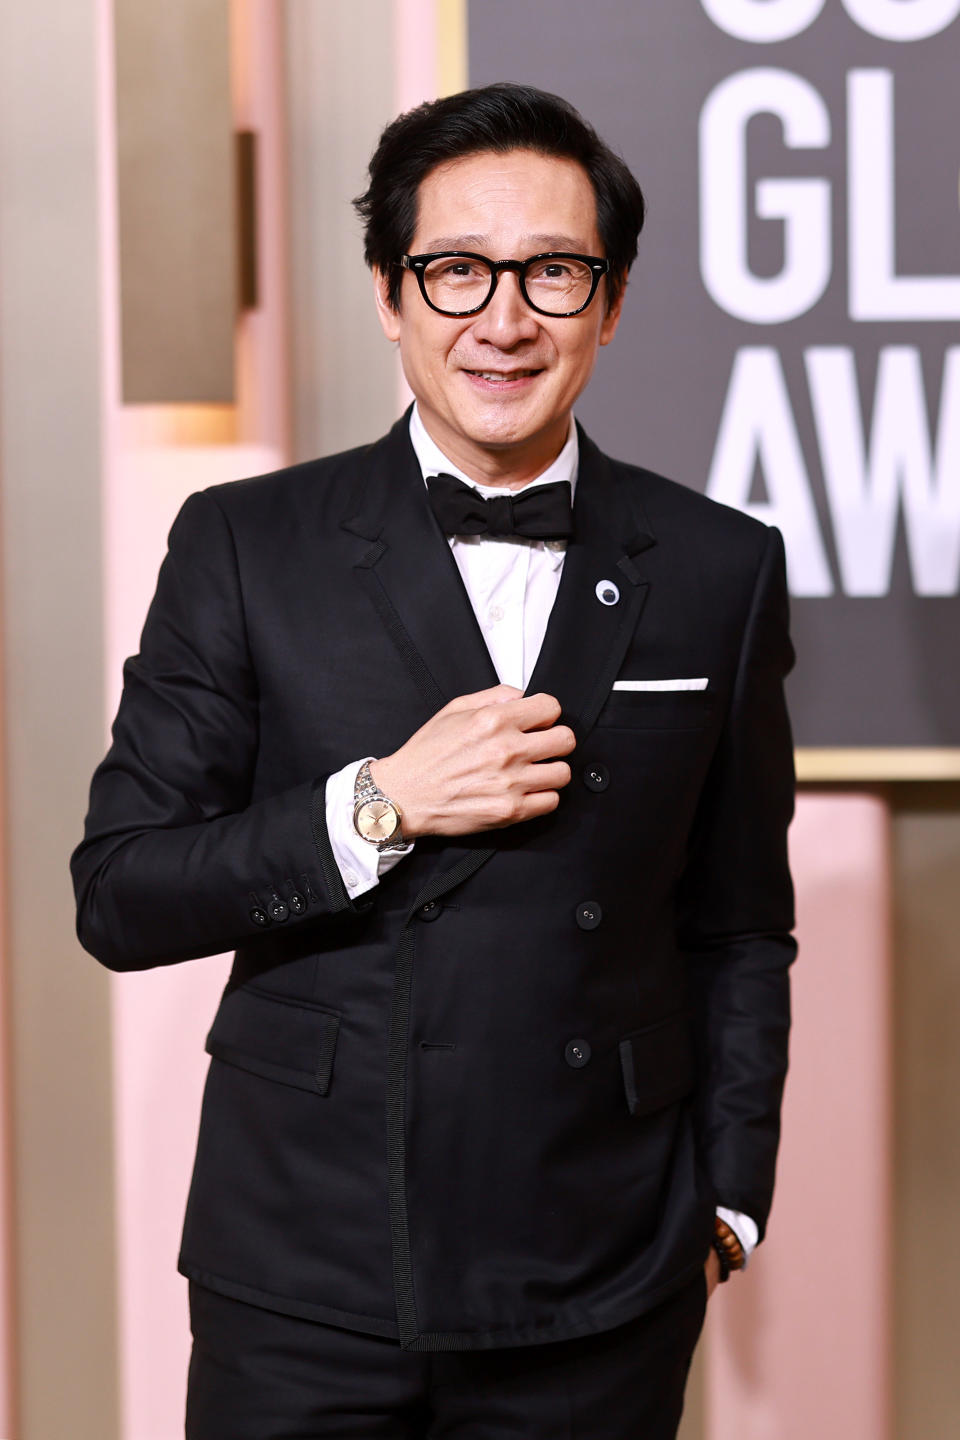 Ke Huy Quan smiles as his photo is taken at an awards show. He's wearing a suit and bowtie